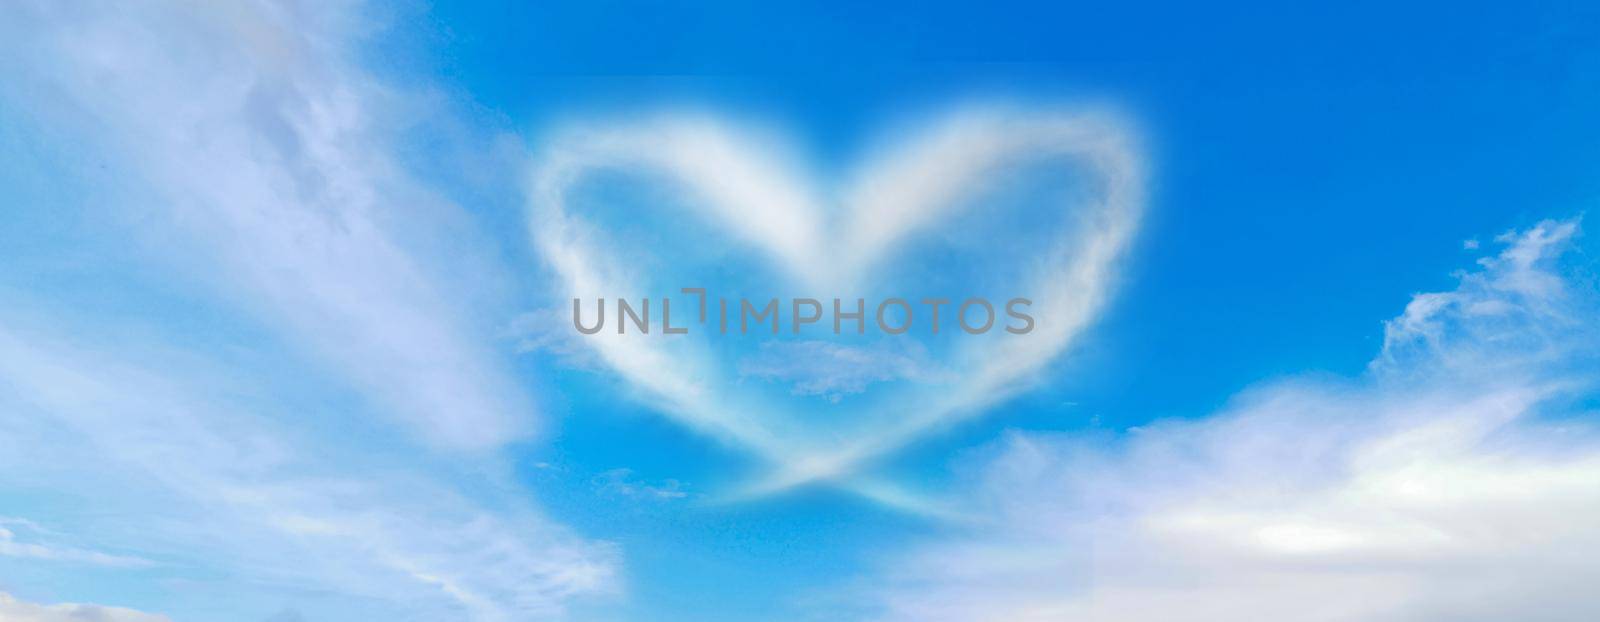 blue sky with hearts shape clouds. Beauty natural background by Andelov13